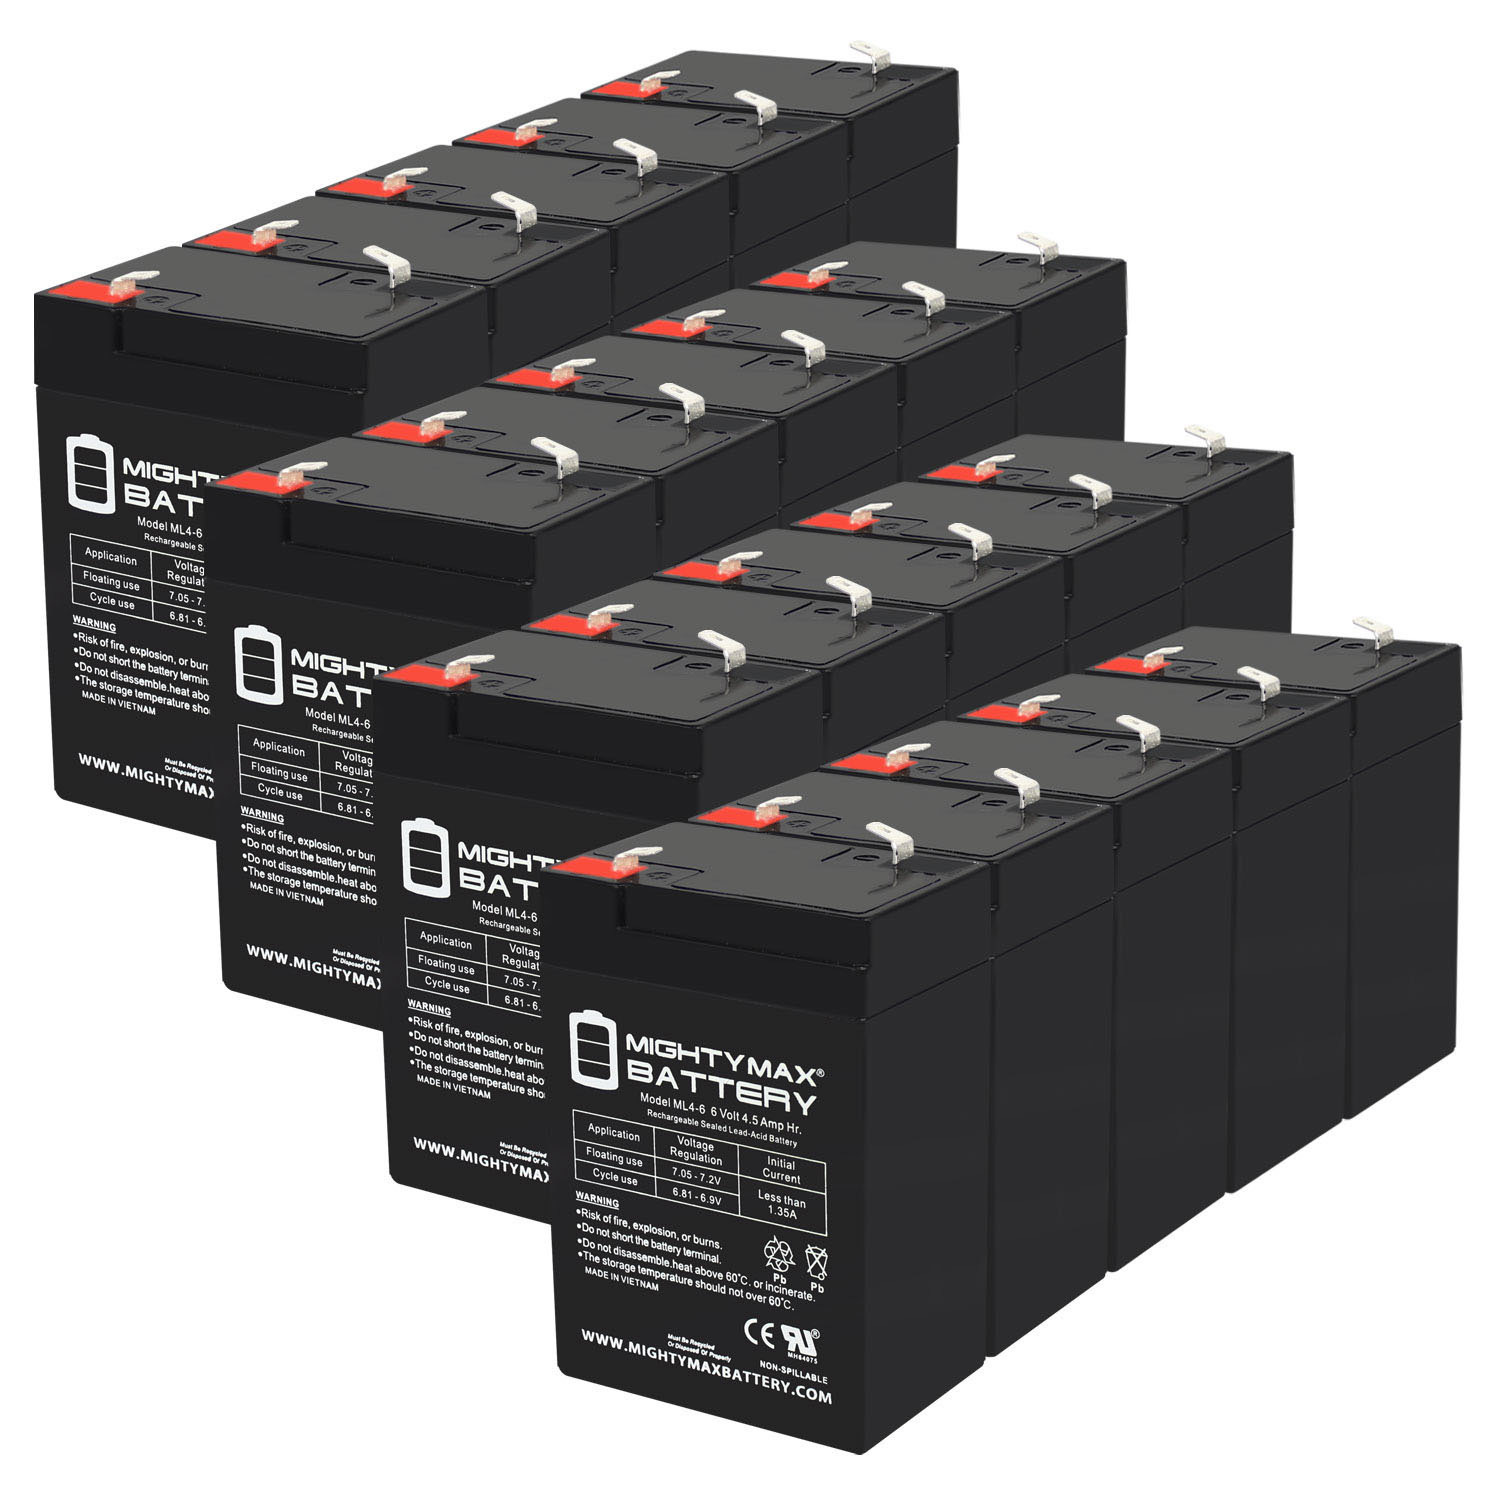 6V 4.5AH SLA Replacement Battery for Dual-Lite 12-334 - 20 Pack